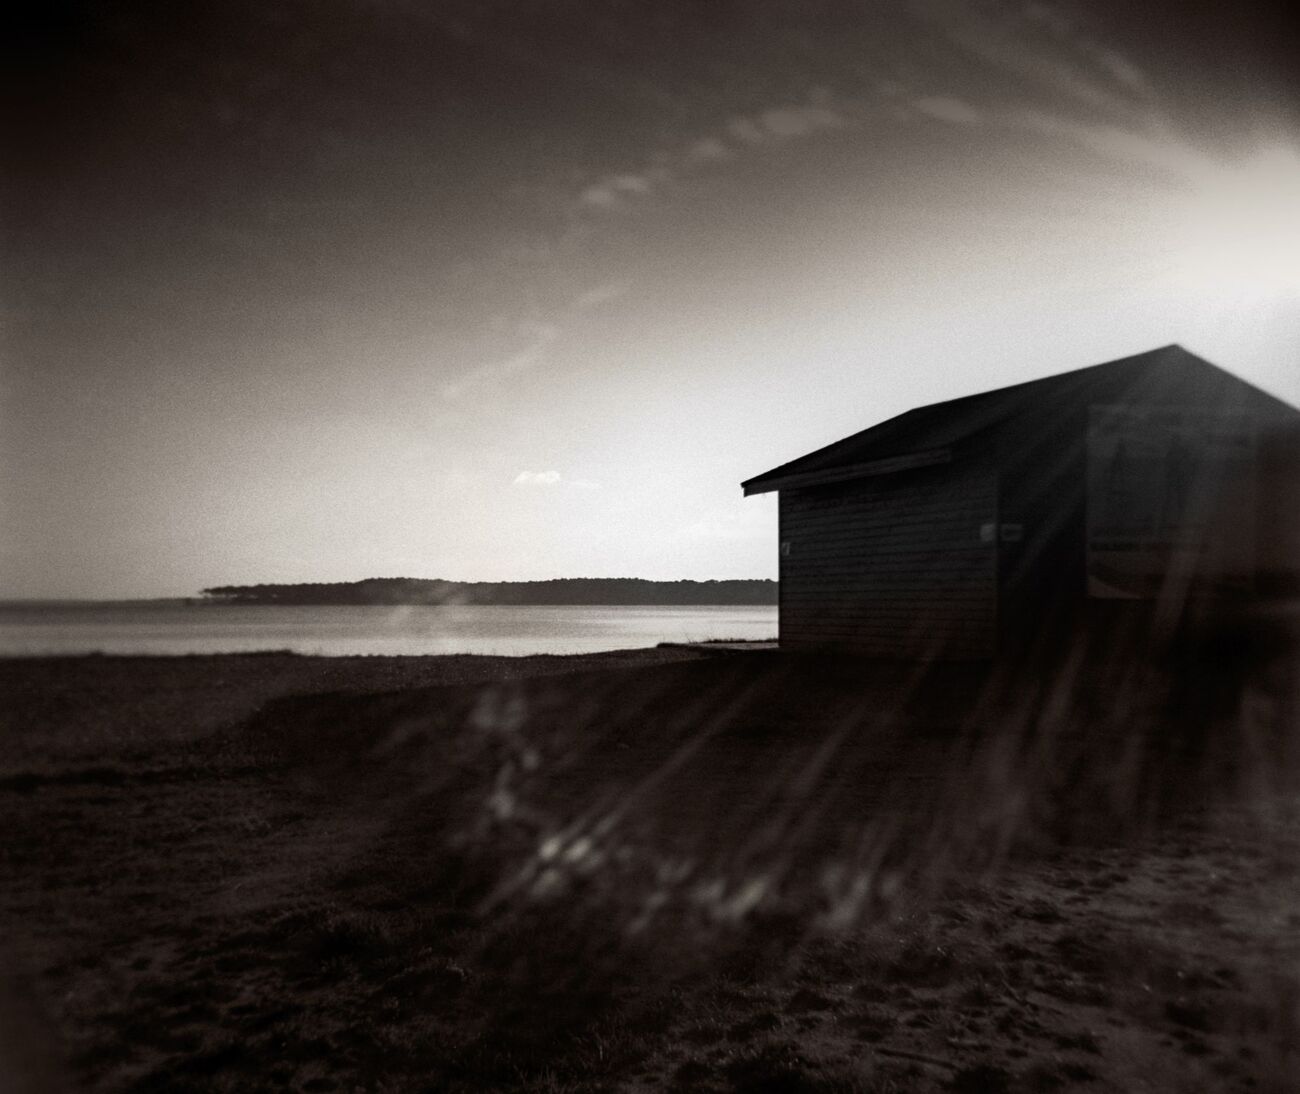 Fine-Art print 15.7 x 13.2 in, Shed by the Lake, etude 2. Ref-11610-12 - Denis Olivier Art Photography